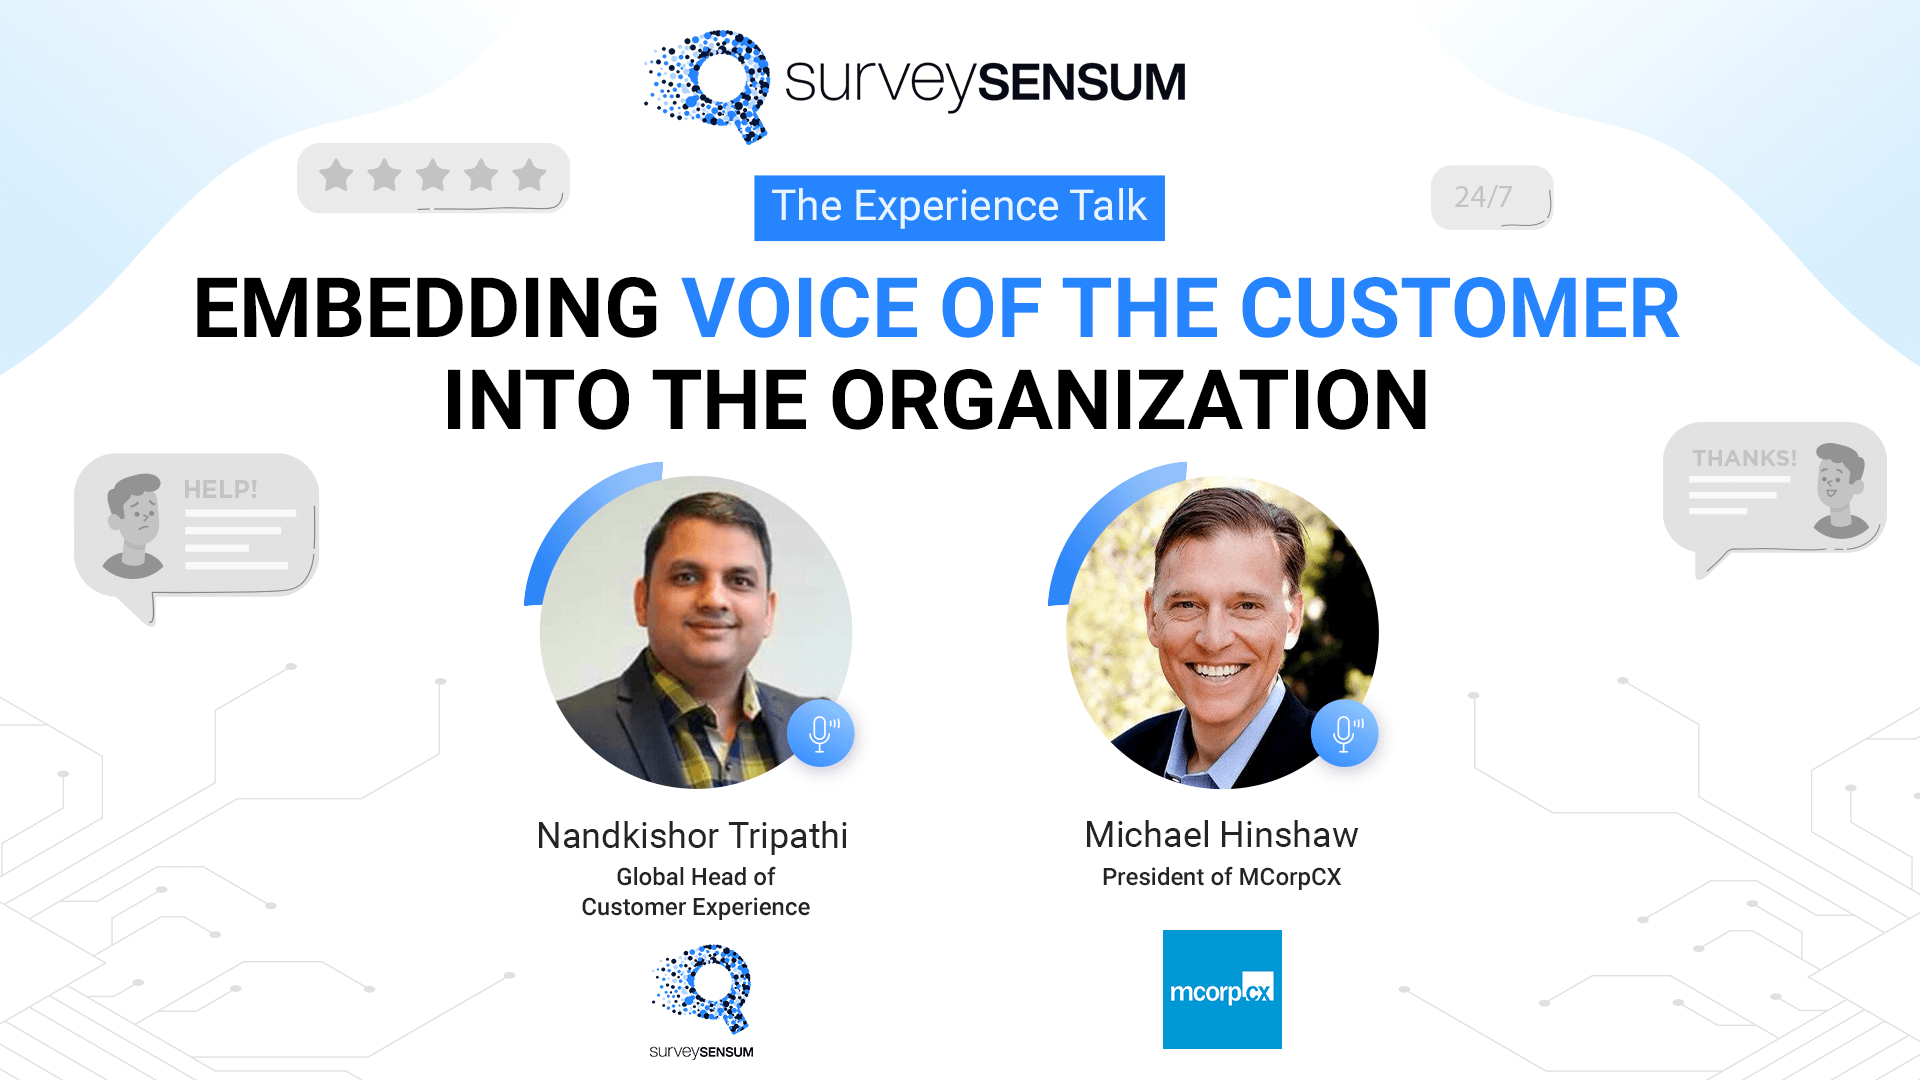 Embedding voice of the customer into the organization